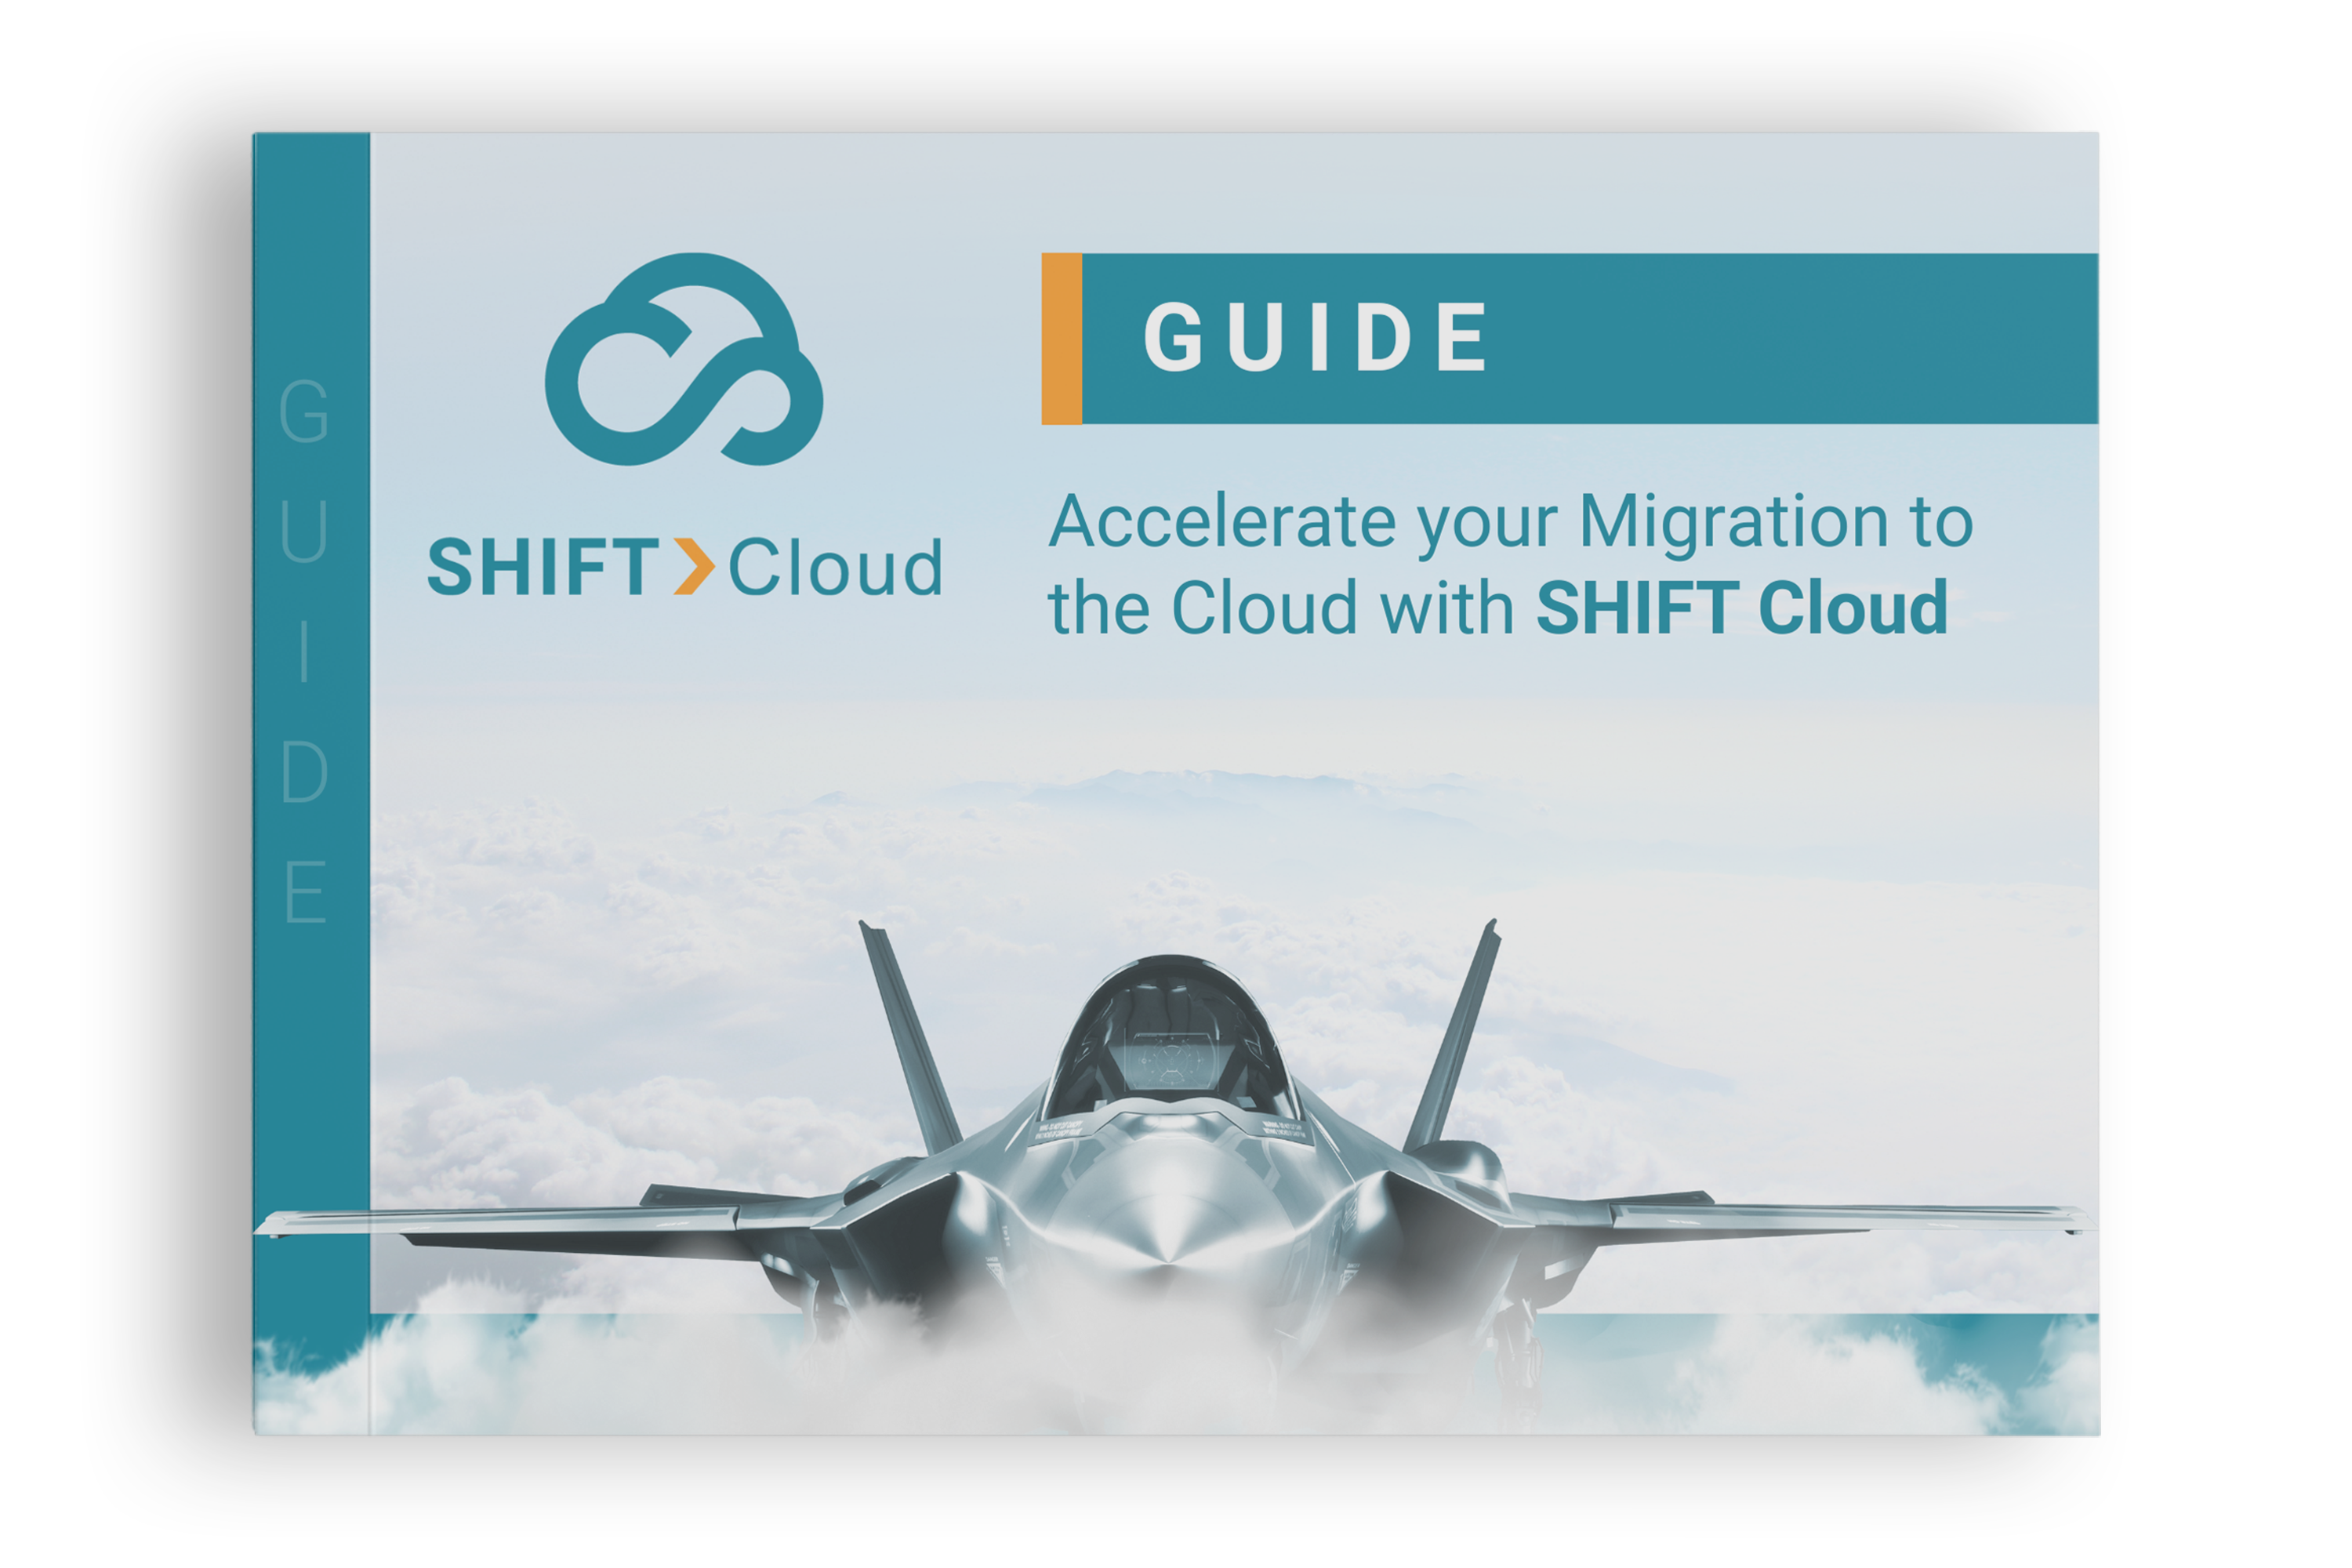 Accelerate your Migration to the Cloud with SHIFT Cloud